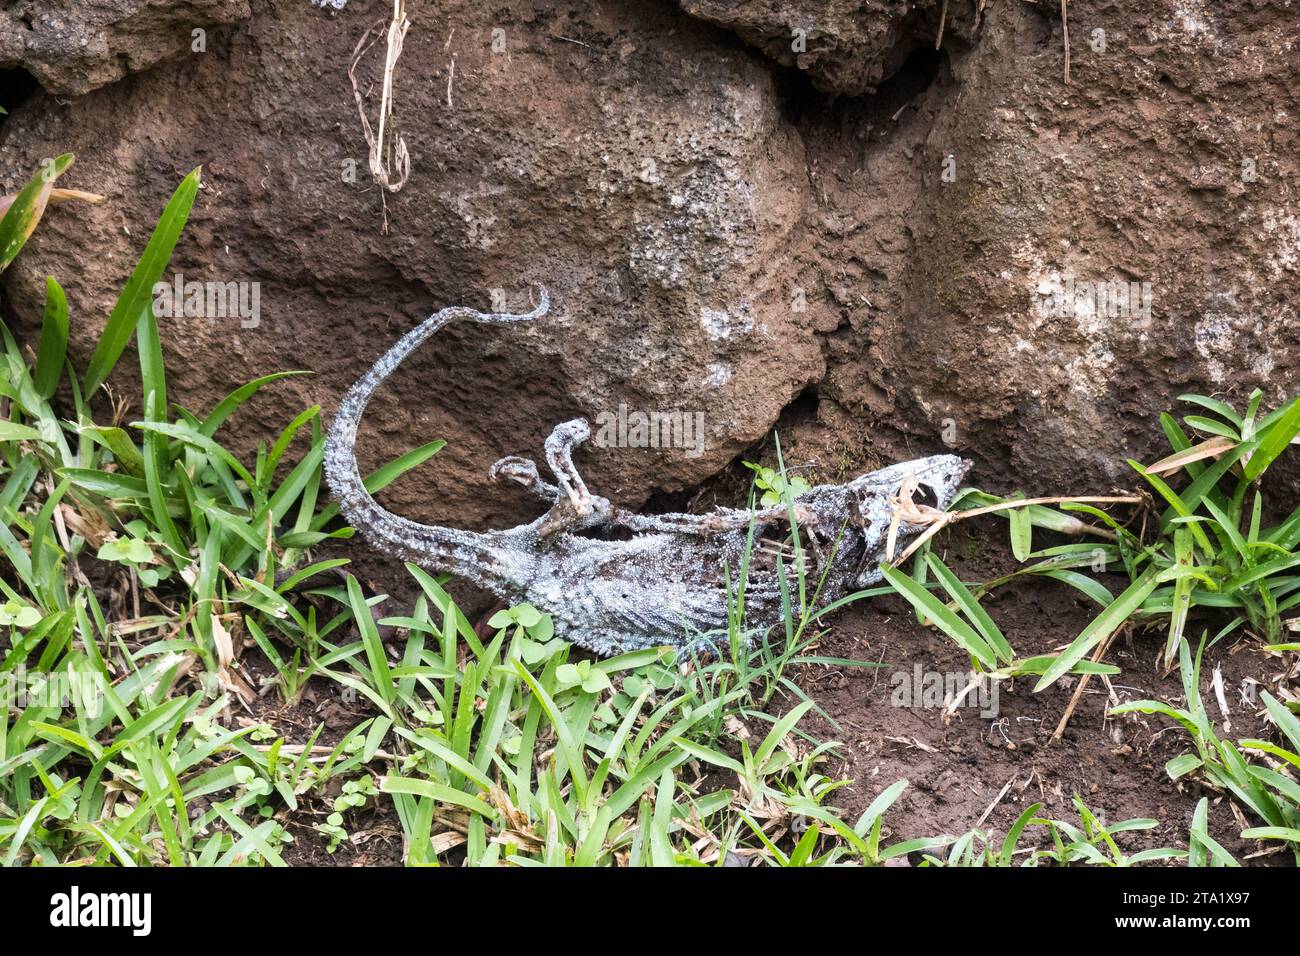 This chameleon died because someone photographed it with a flash. The chameleon become blind and died because it cannot find his way anymore., Reunion Stock Photo